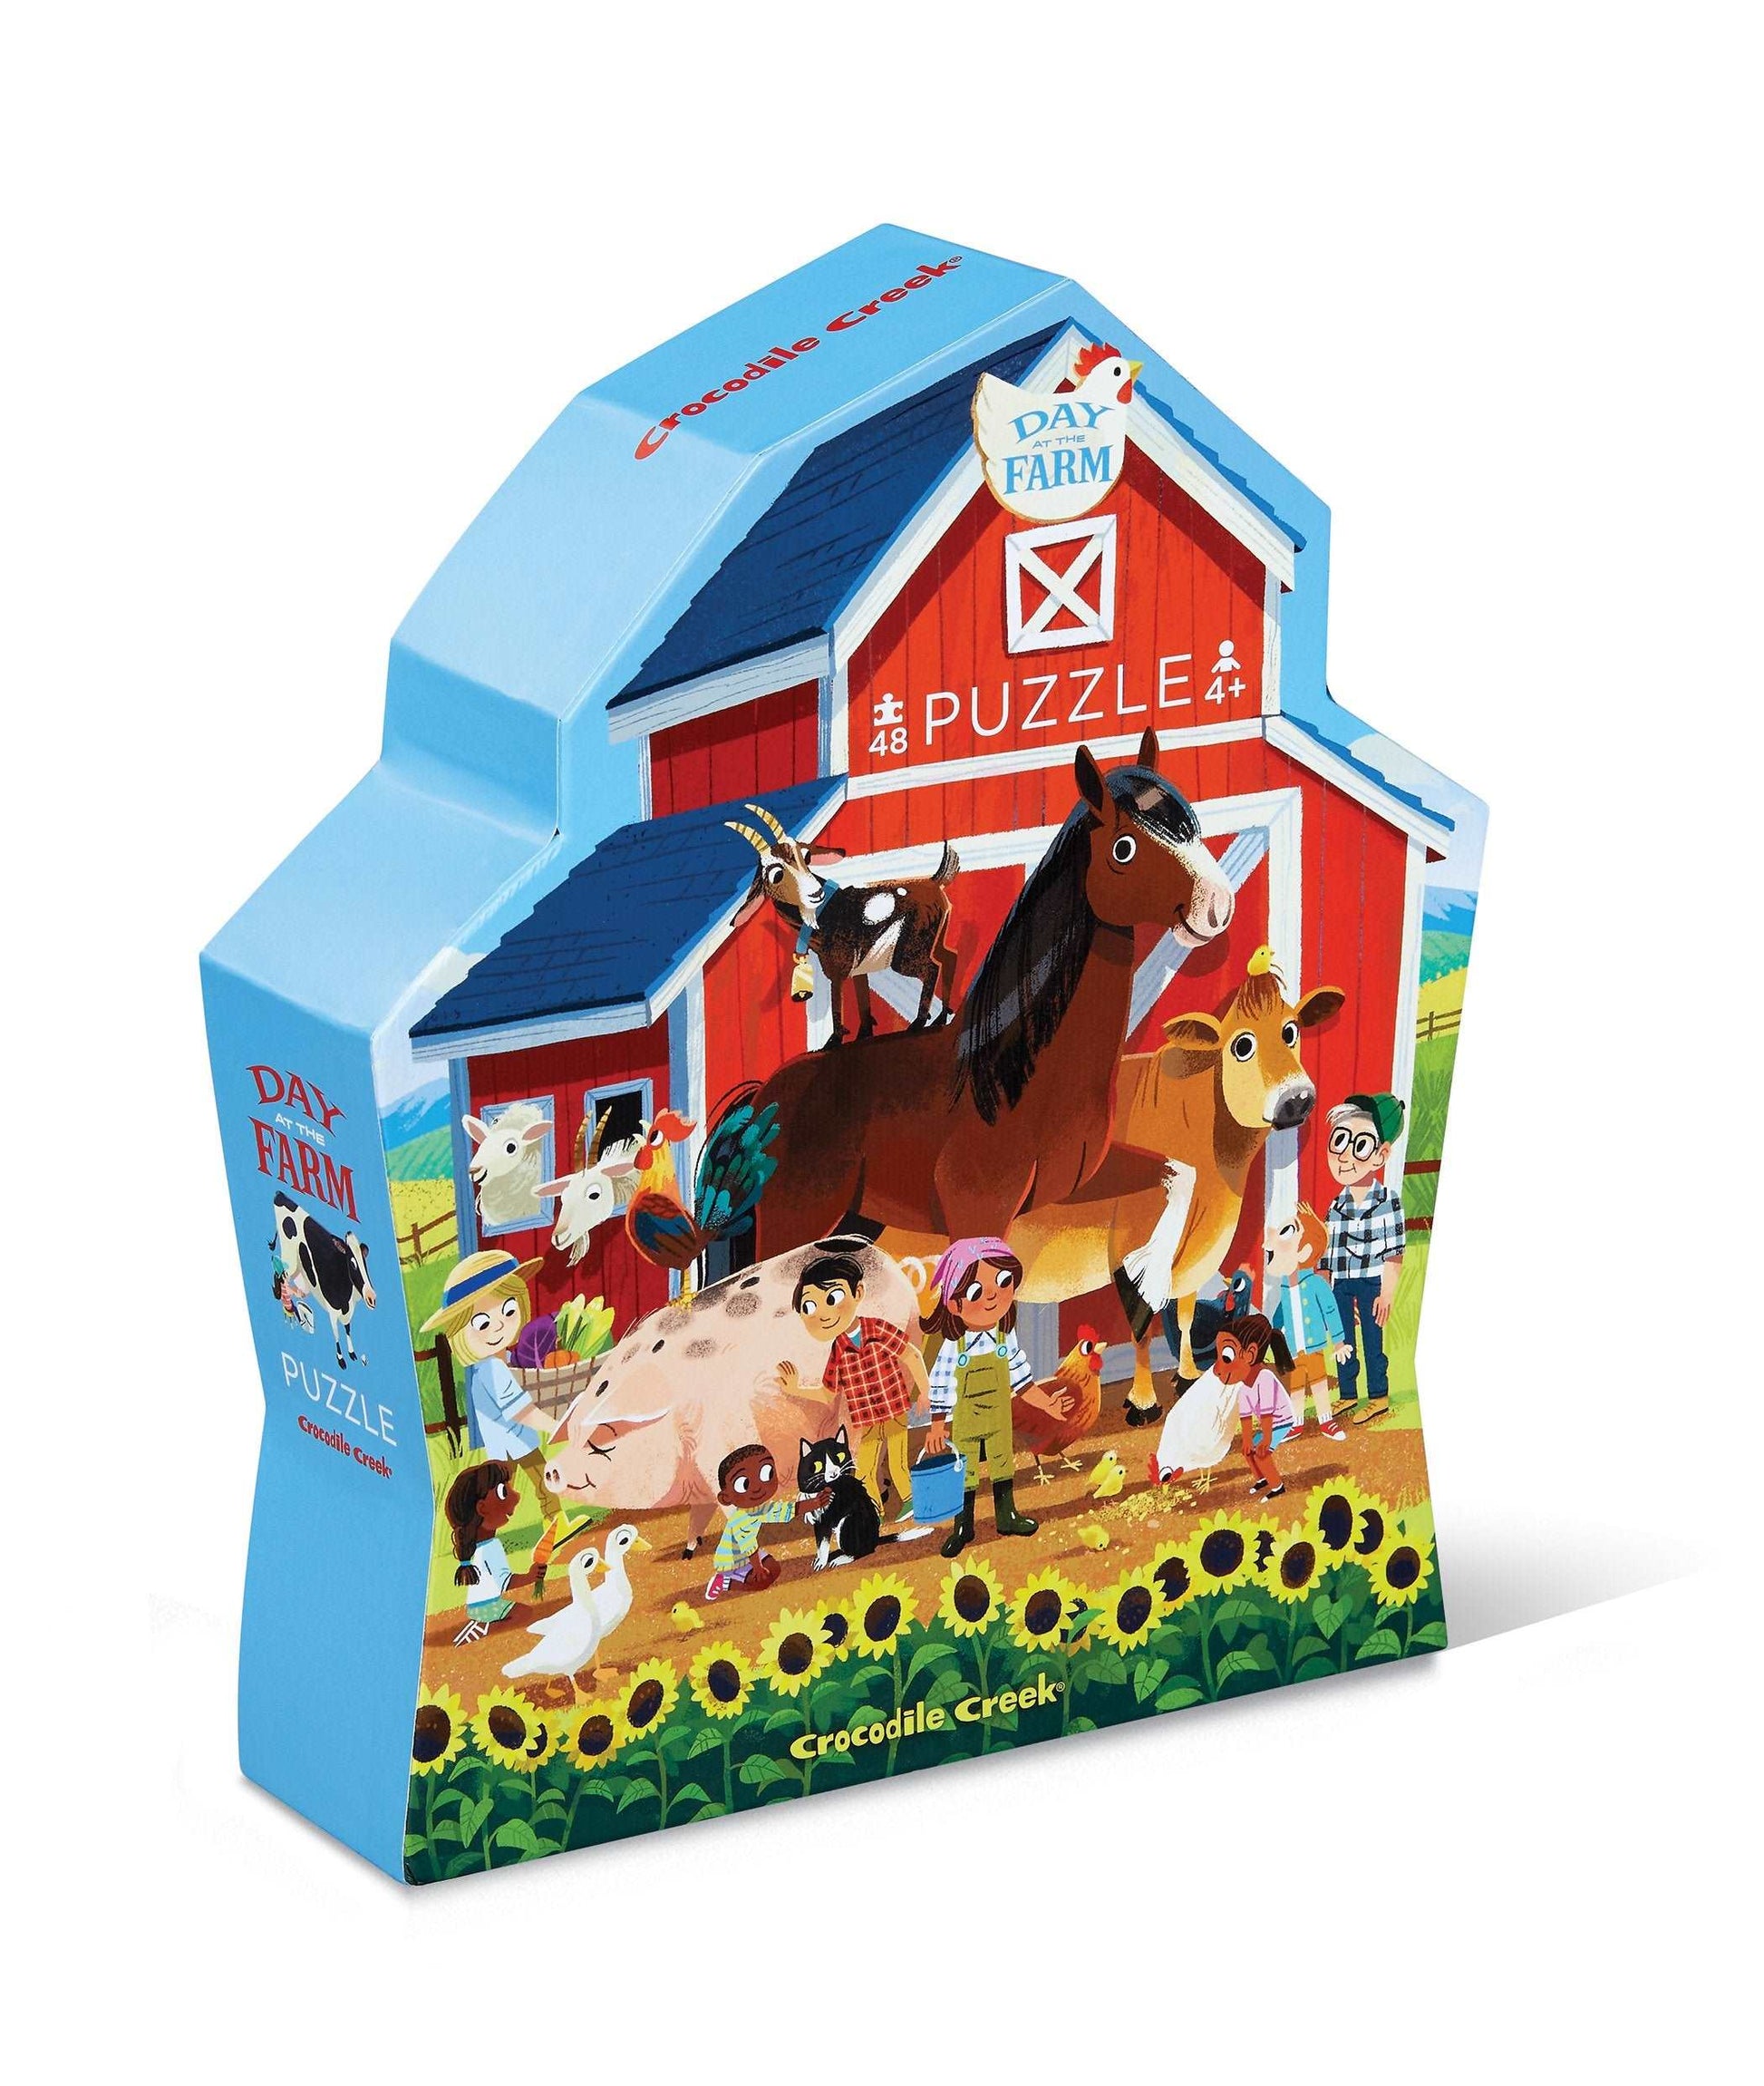 Crocodile Creek 48pc Puzzle Day at the Museum Farm The Toy Wagon